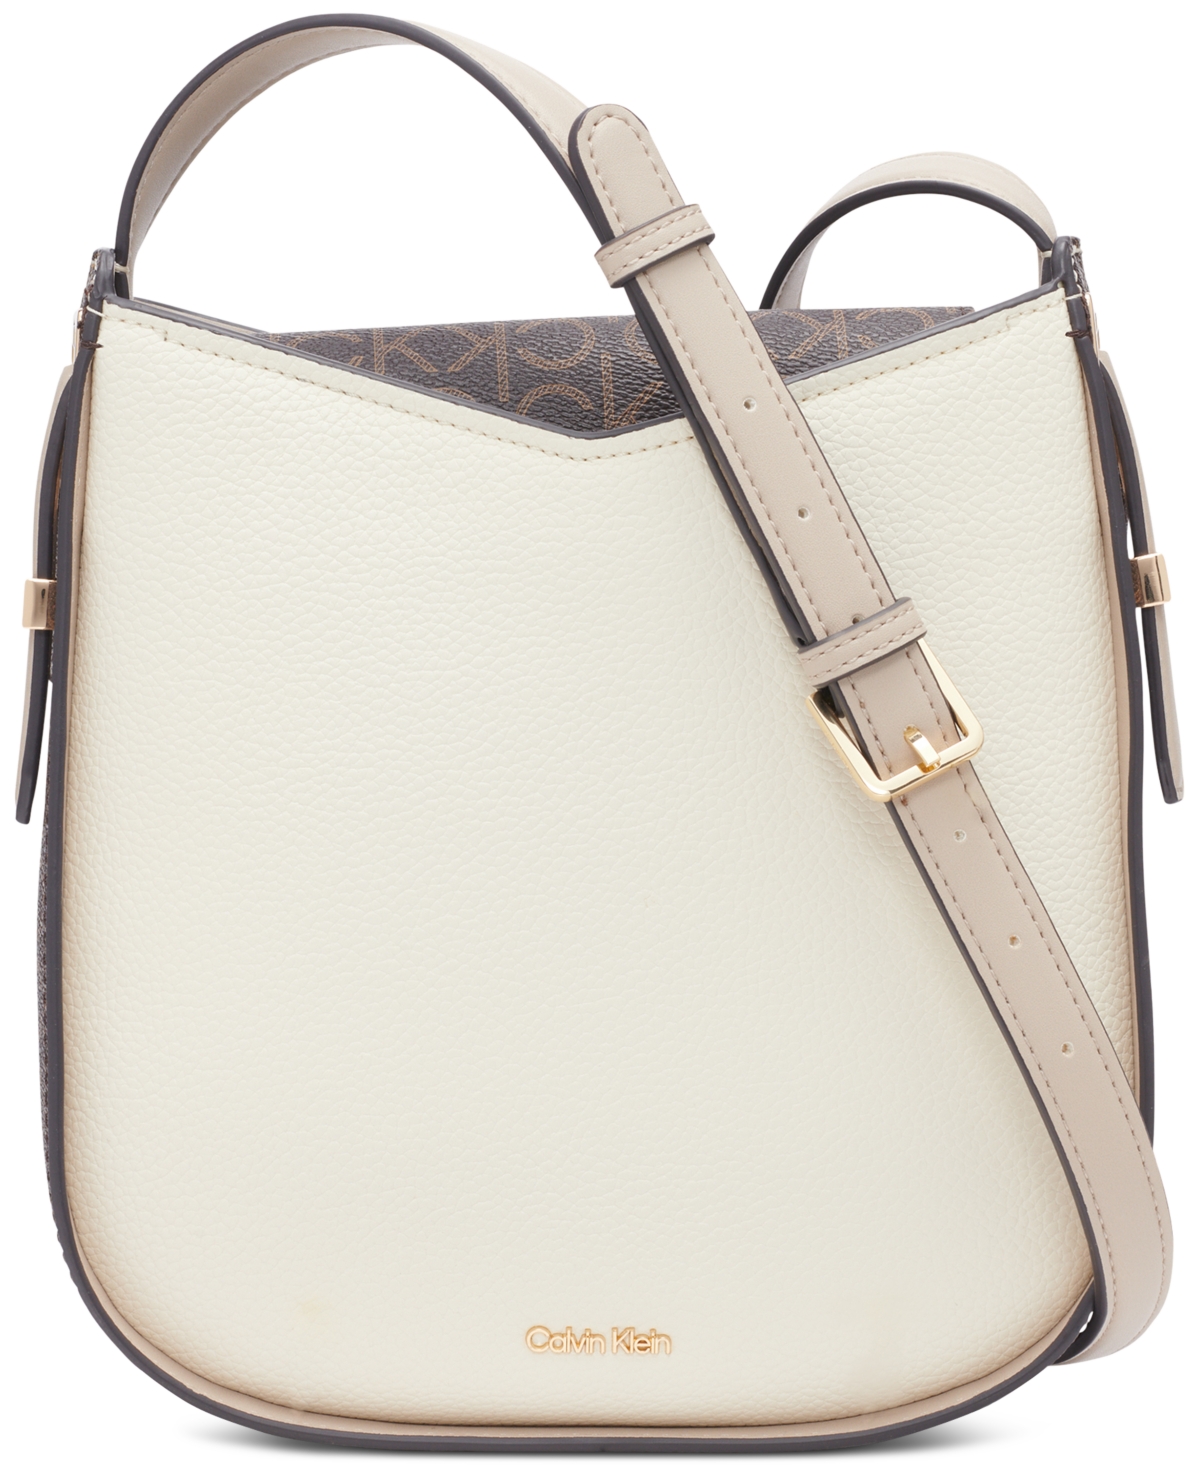 Calvin Klein Charlie Signature Magnetic Flap Small Crossbody